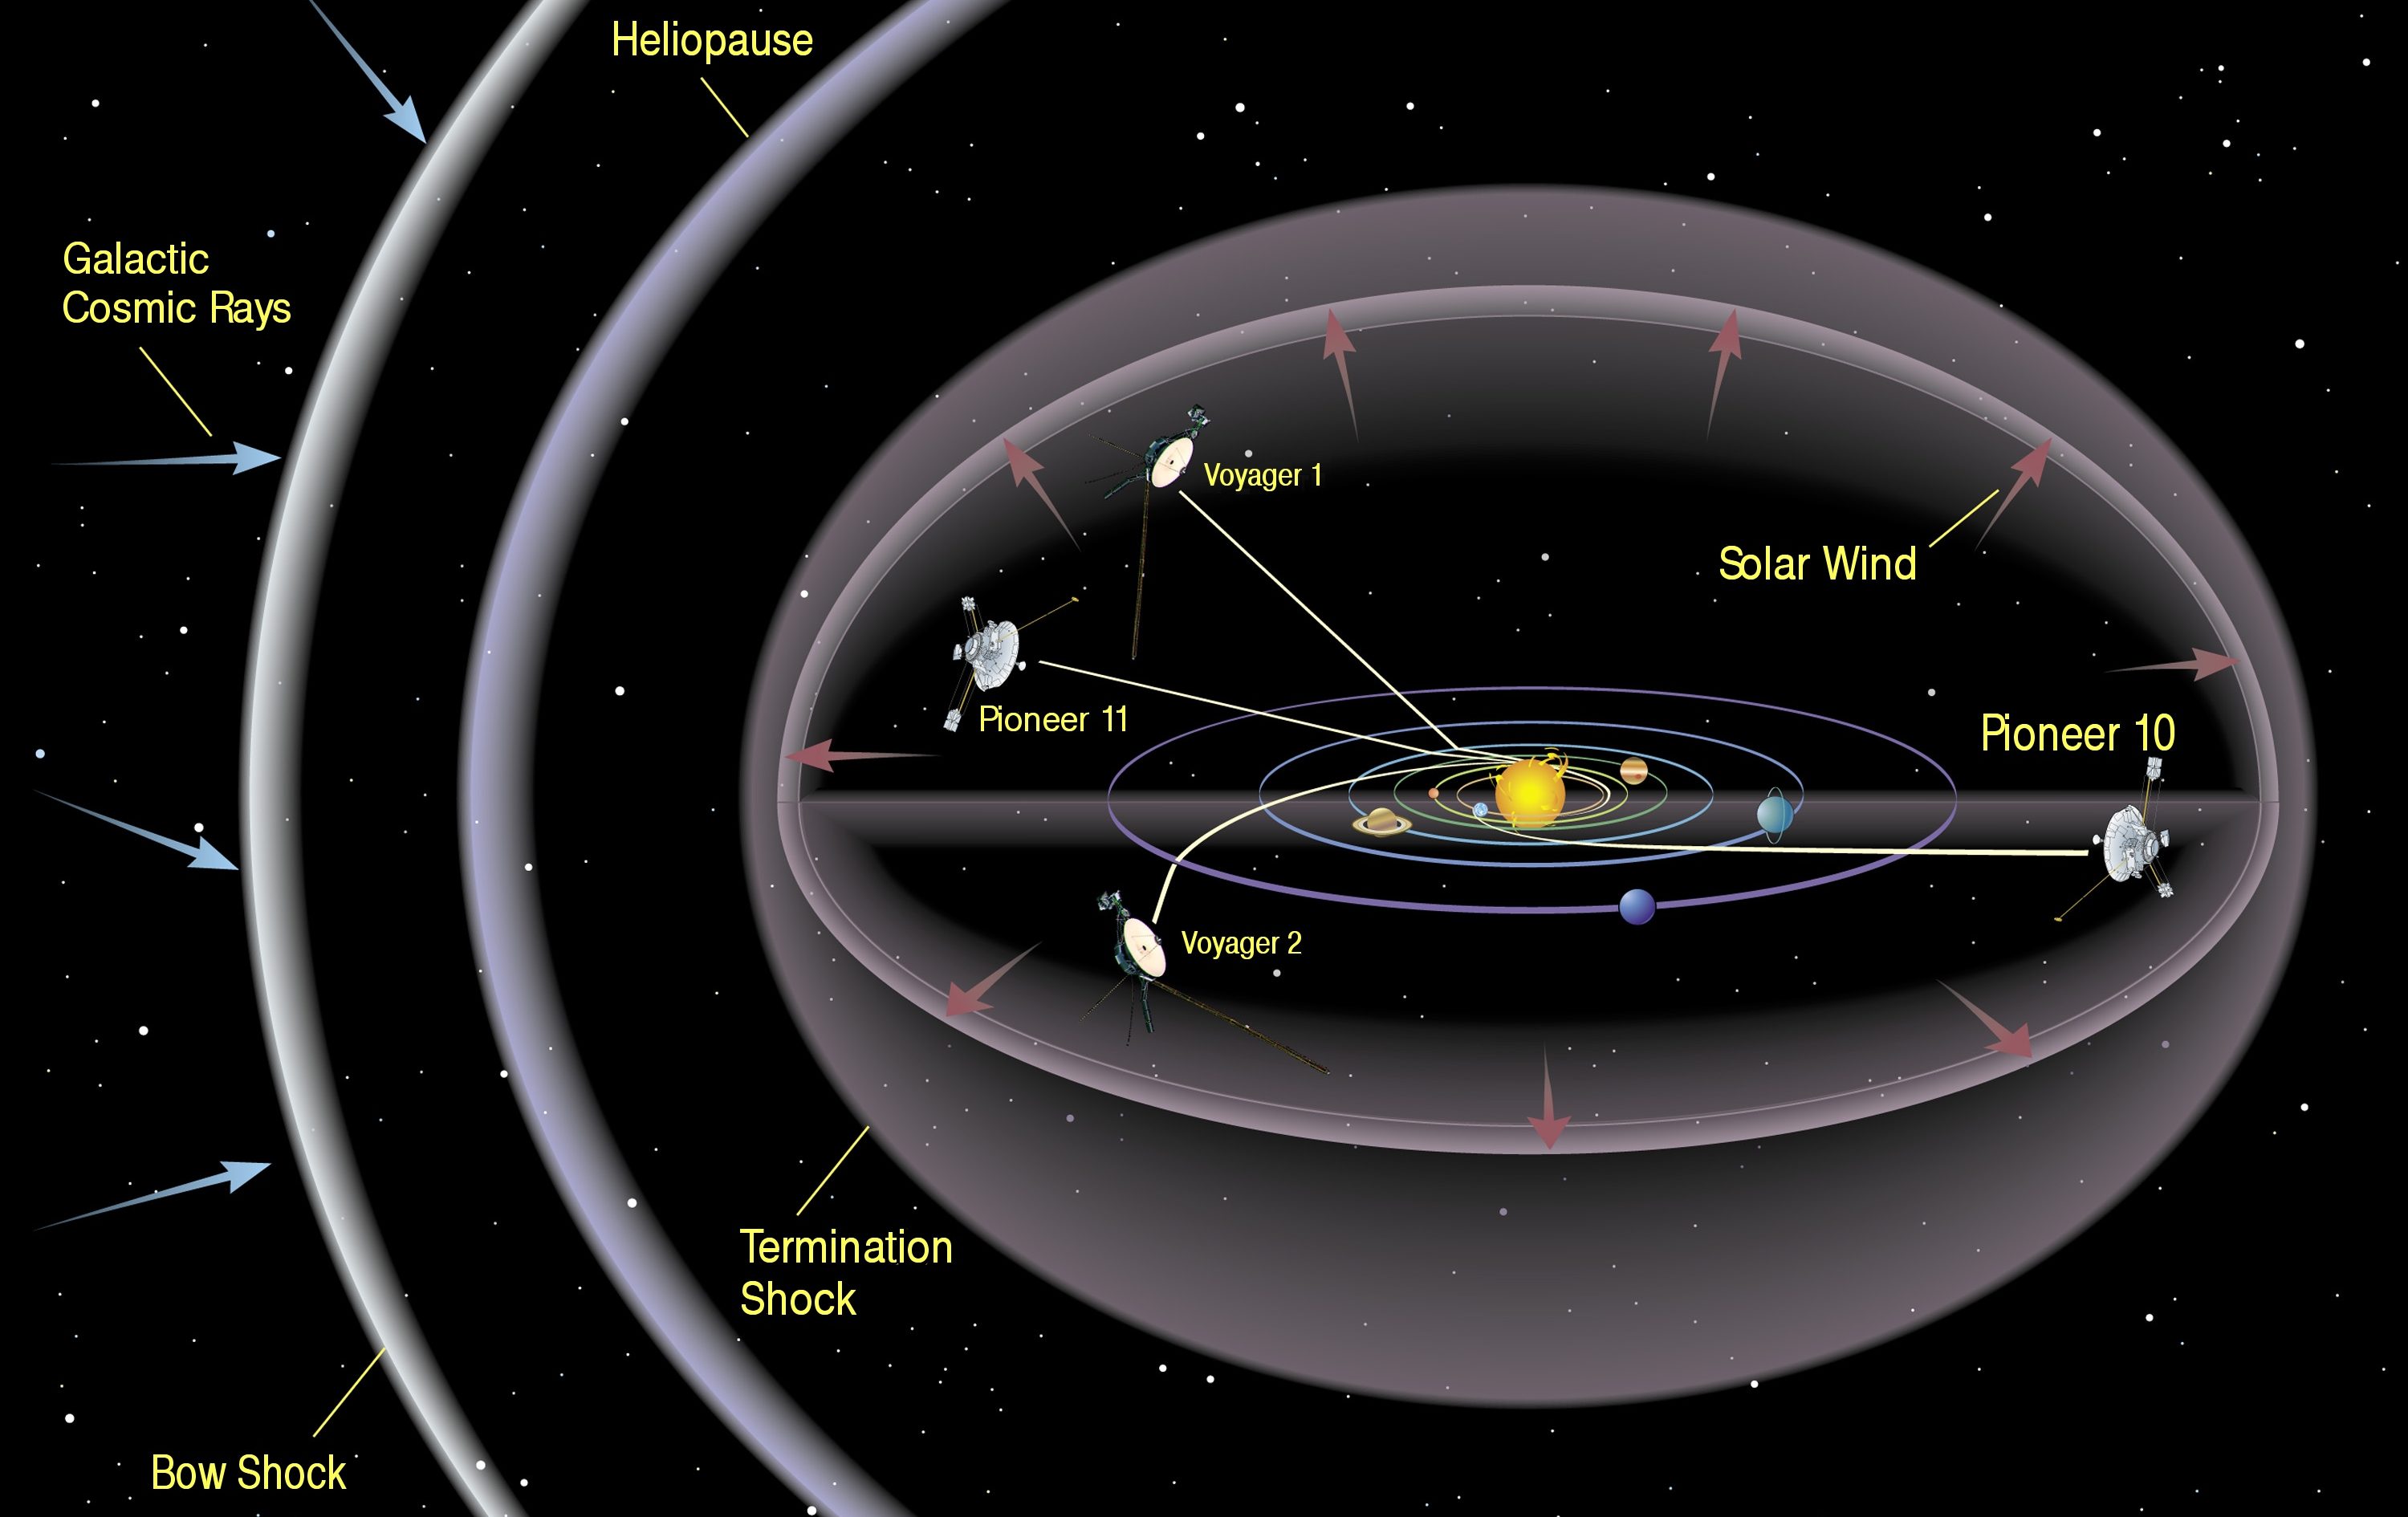 A diagram of the solar system illustrates the heliosphere, detailing the termination shock, heliopause, and bow shock, along with the paths of Pioneer 10, Pioneer 11, Voyager 1, and Voyager 2. This visual representation underscores key aspects of fundamental science in our cosmic neighborhood.